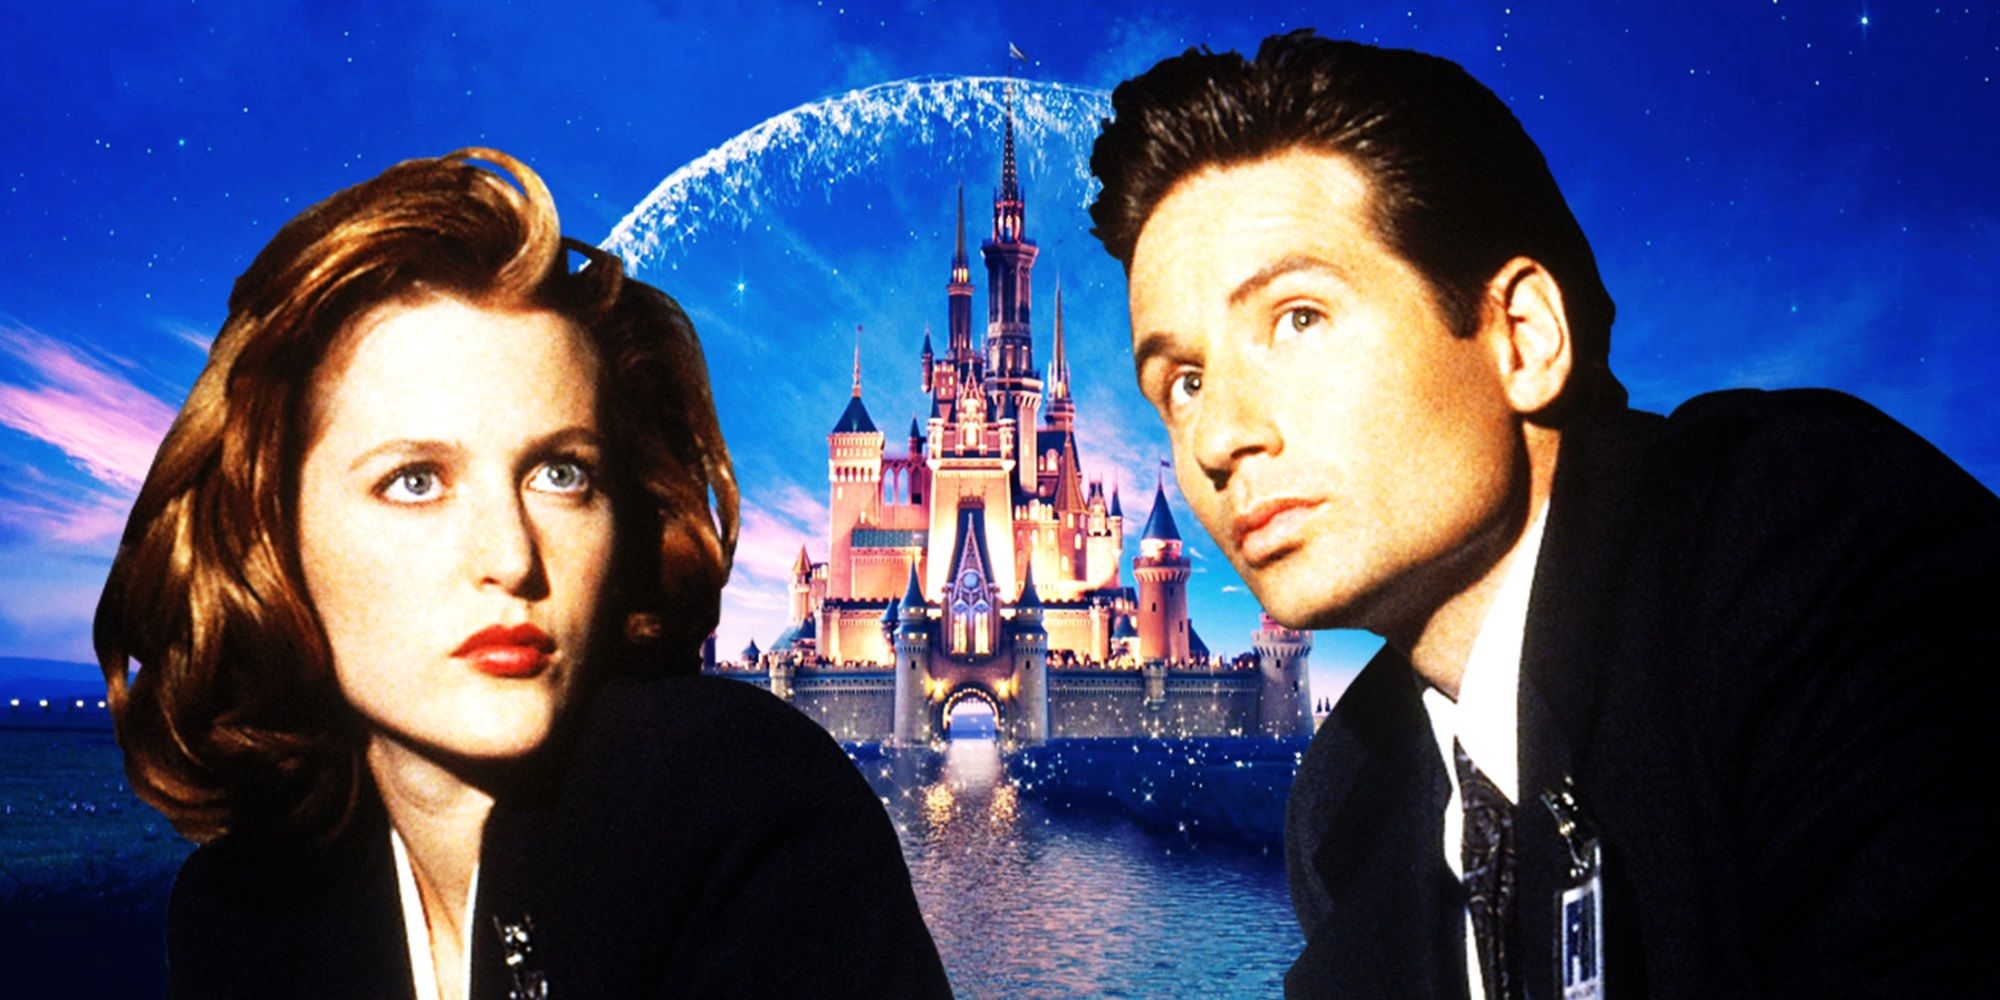 Mulder and Scully from The X-Files imposed on the Disney logo